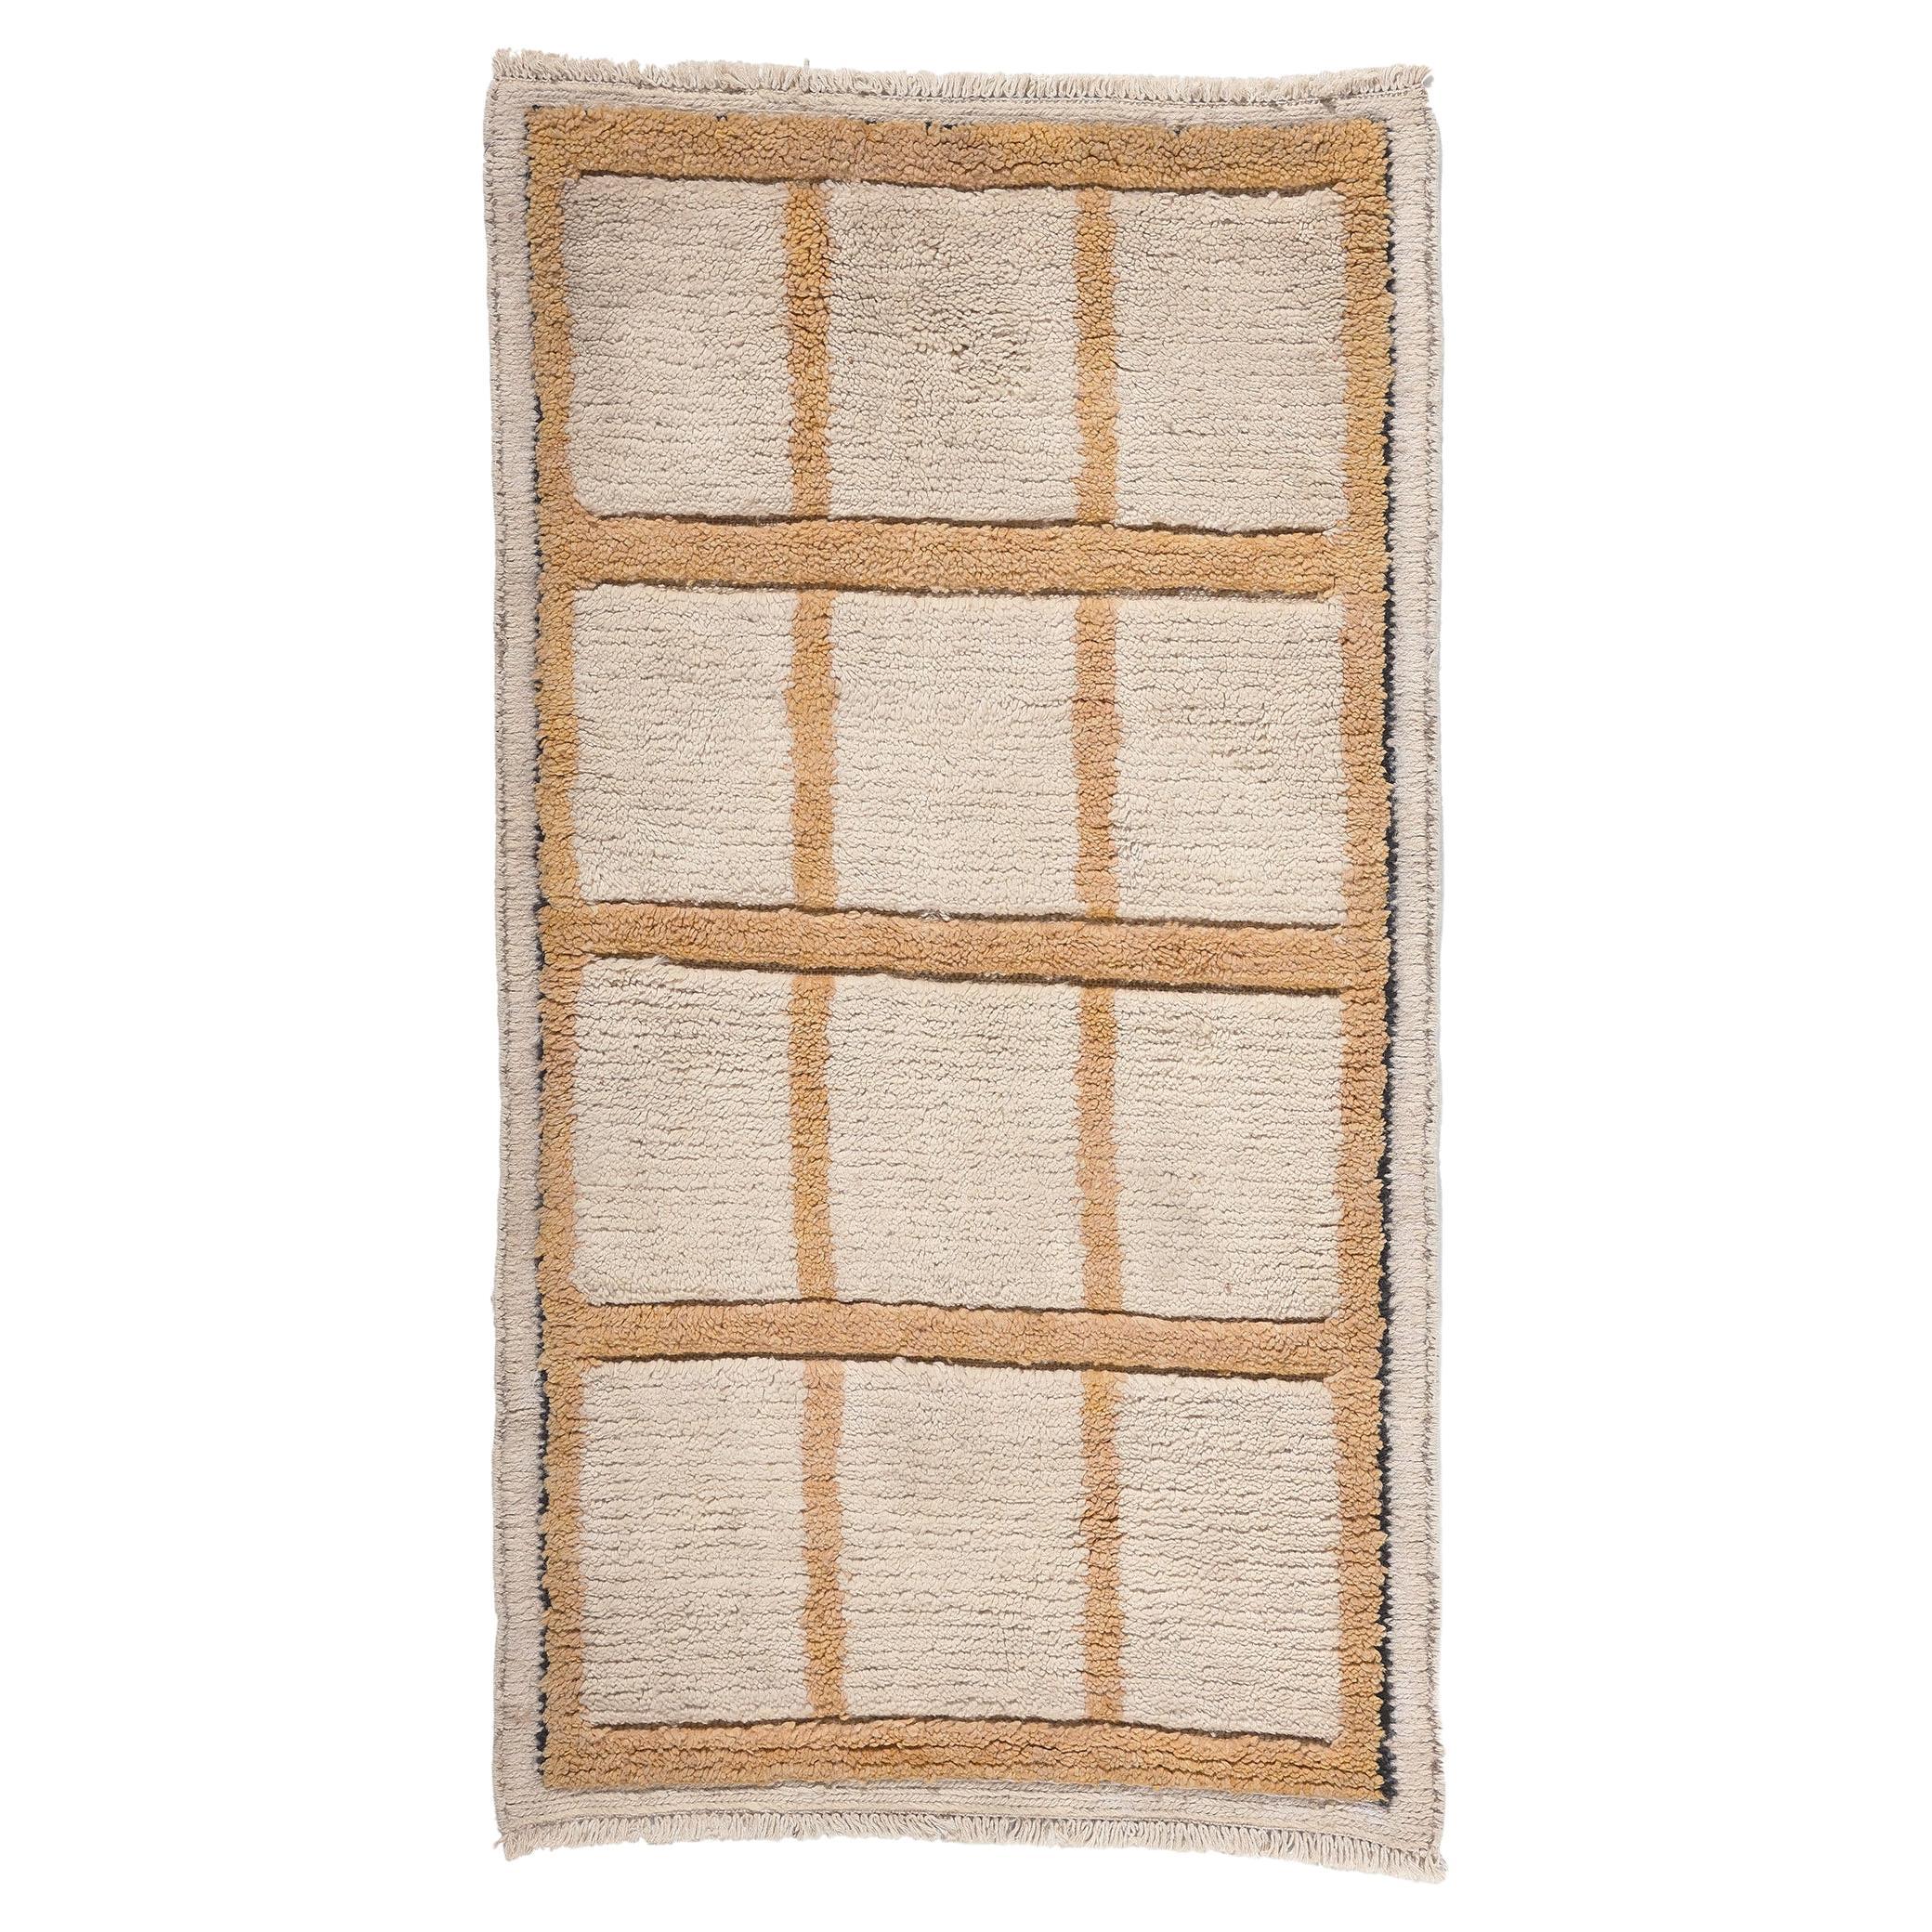 Modern Moroccan Rug with Neutral Earth-Tone Colors